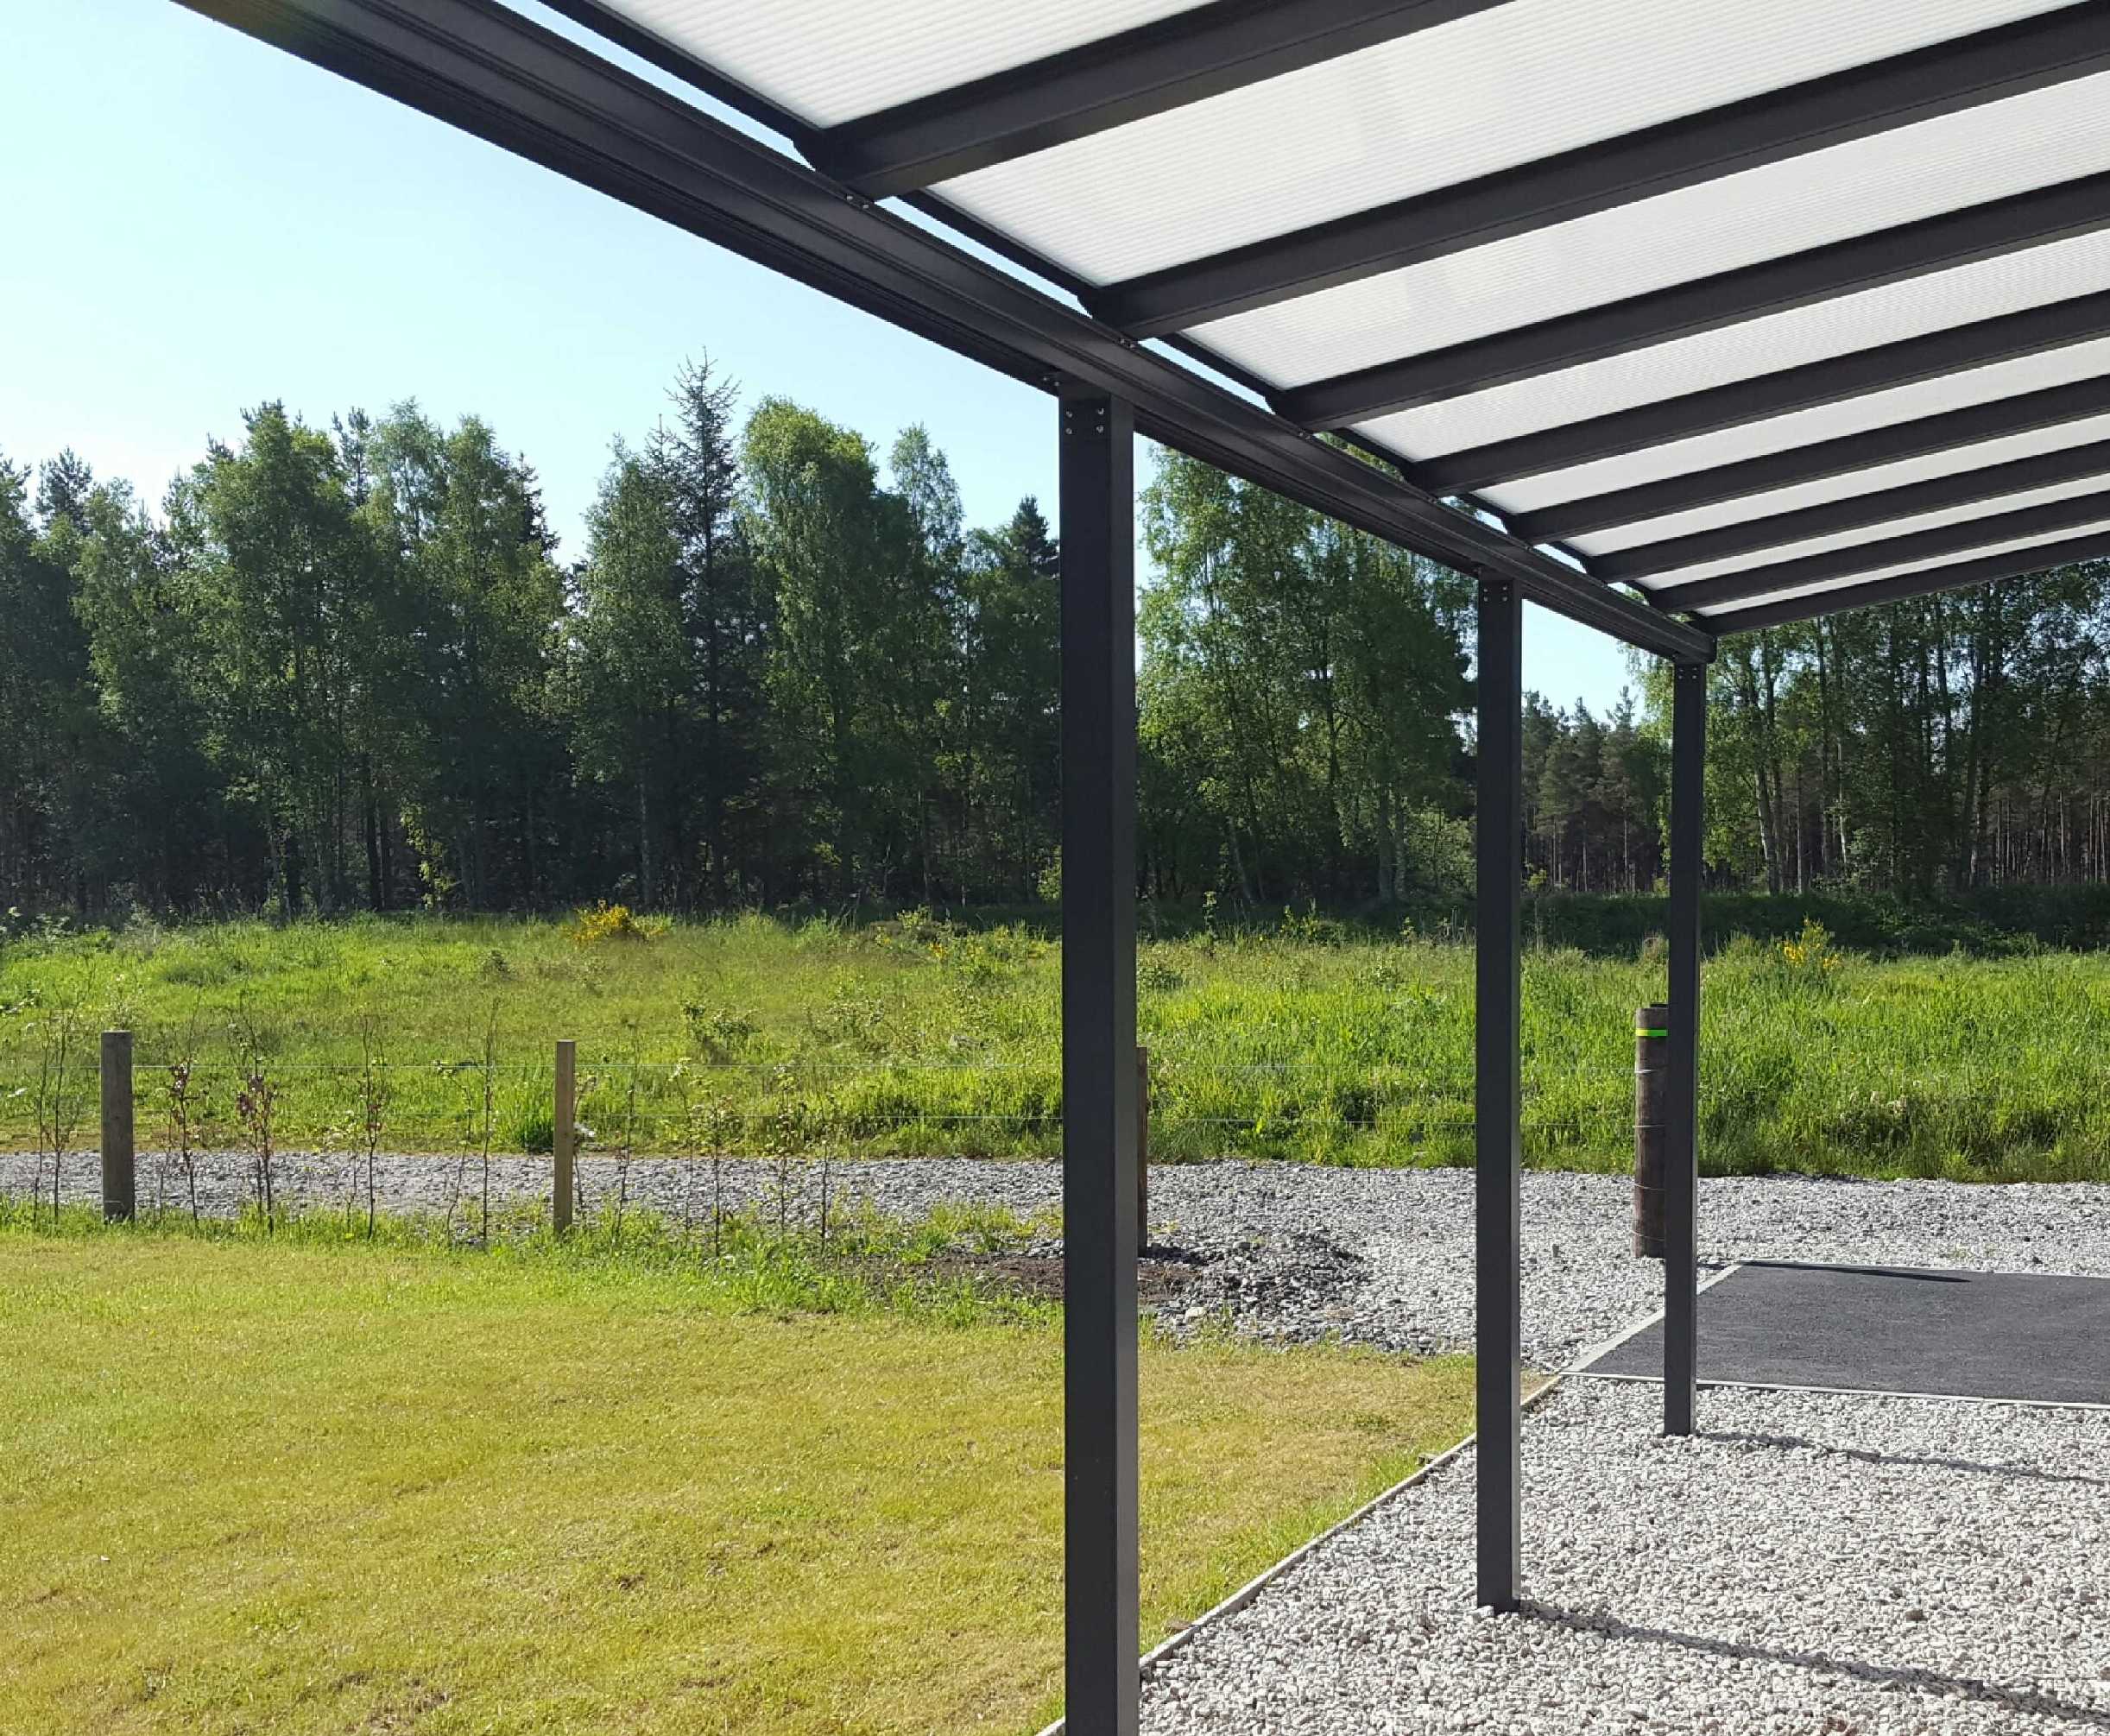 SPECIAL OFFER Omega Smart Lean-To Canopy, Anthracite Grey, 16mm Polycarbonate Glazing - 5.0m (W) x 2.5m (P), (3) Supporting Posts